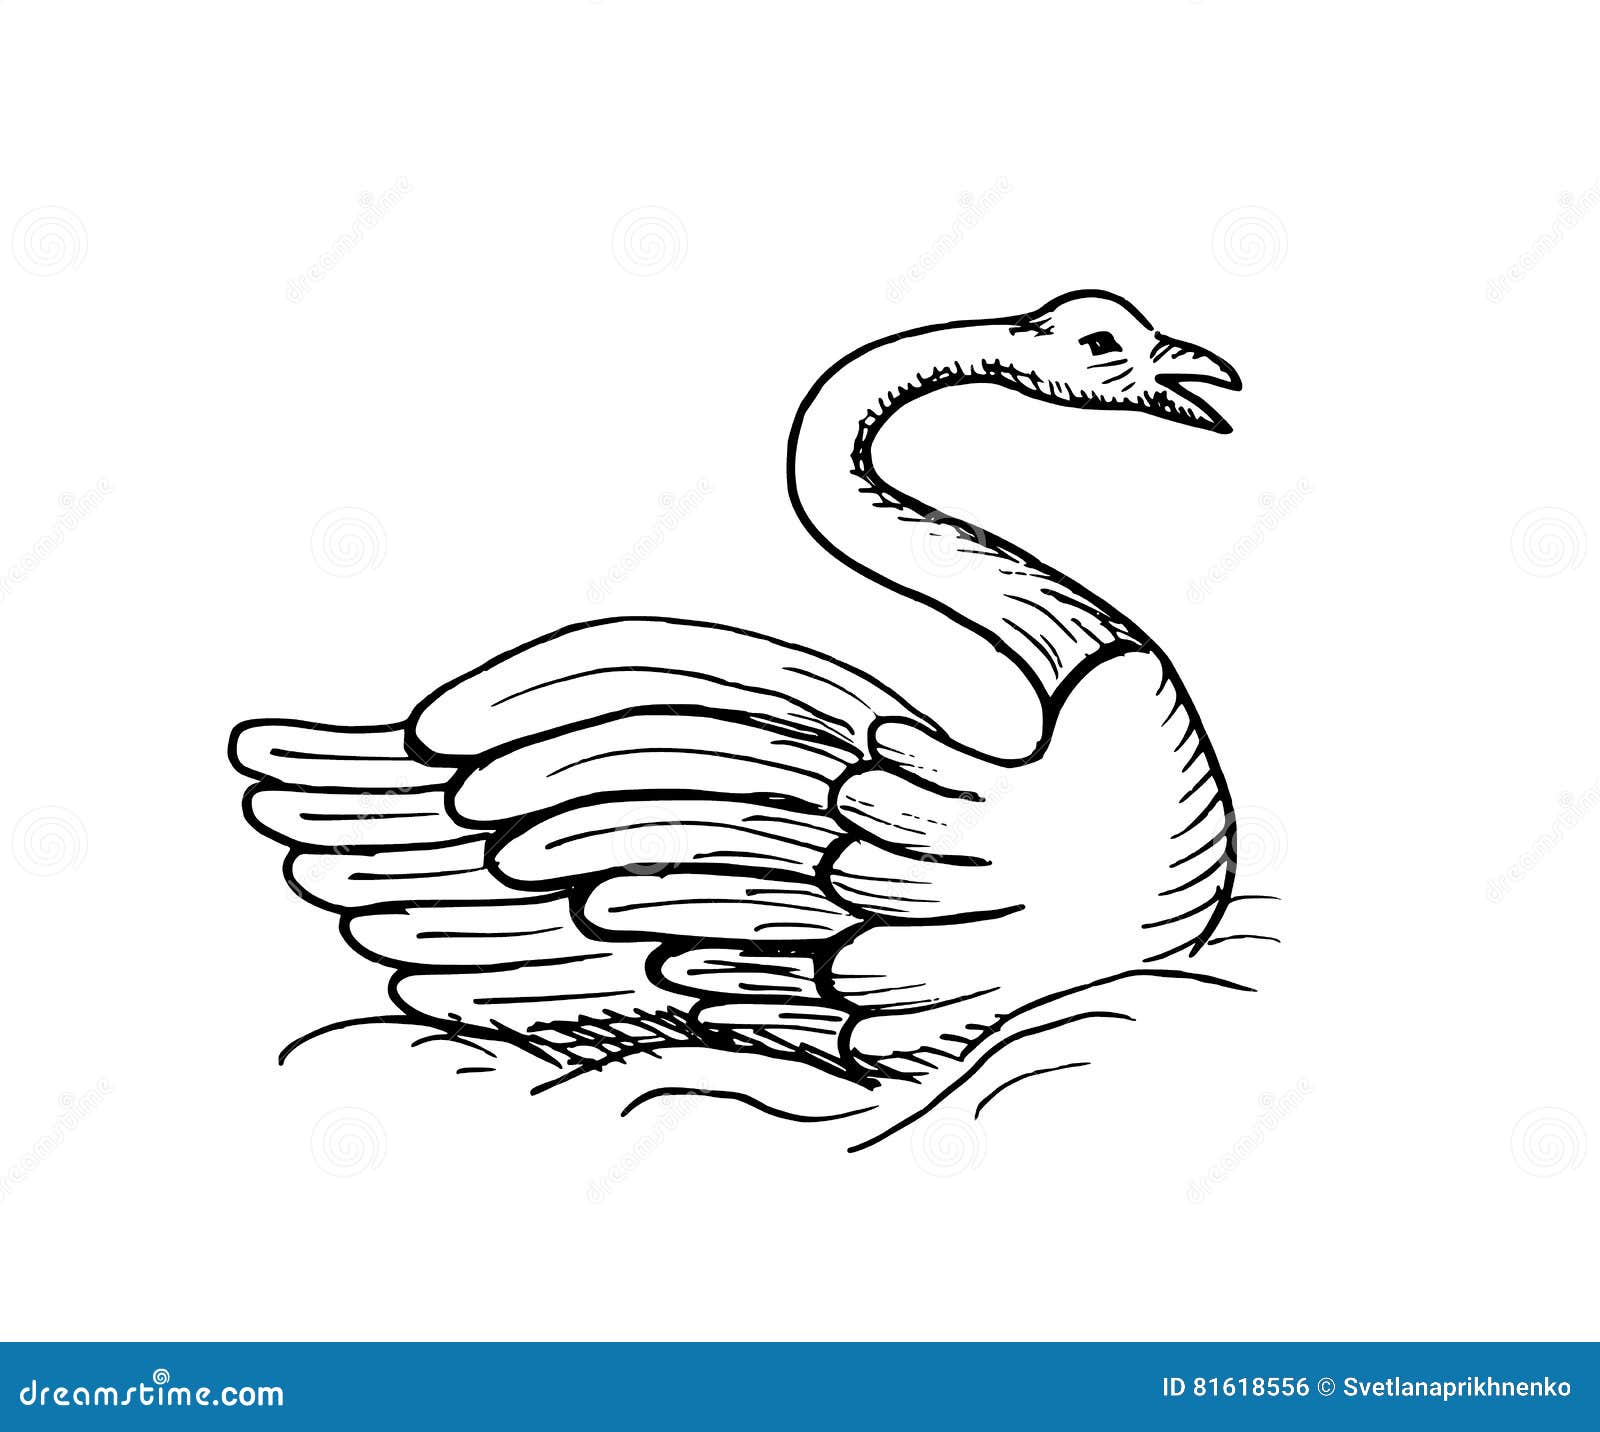 Hand-drawn sketch of swan stock vector. Illustration of 